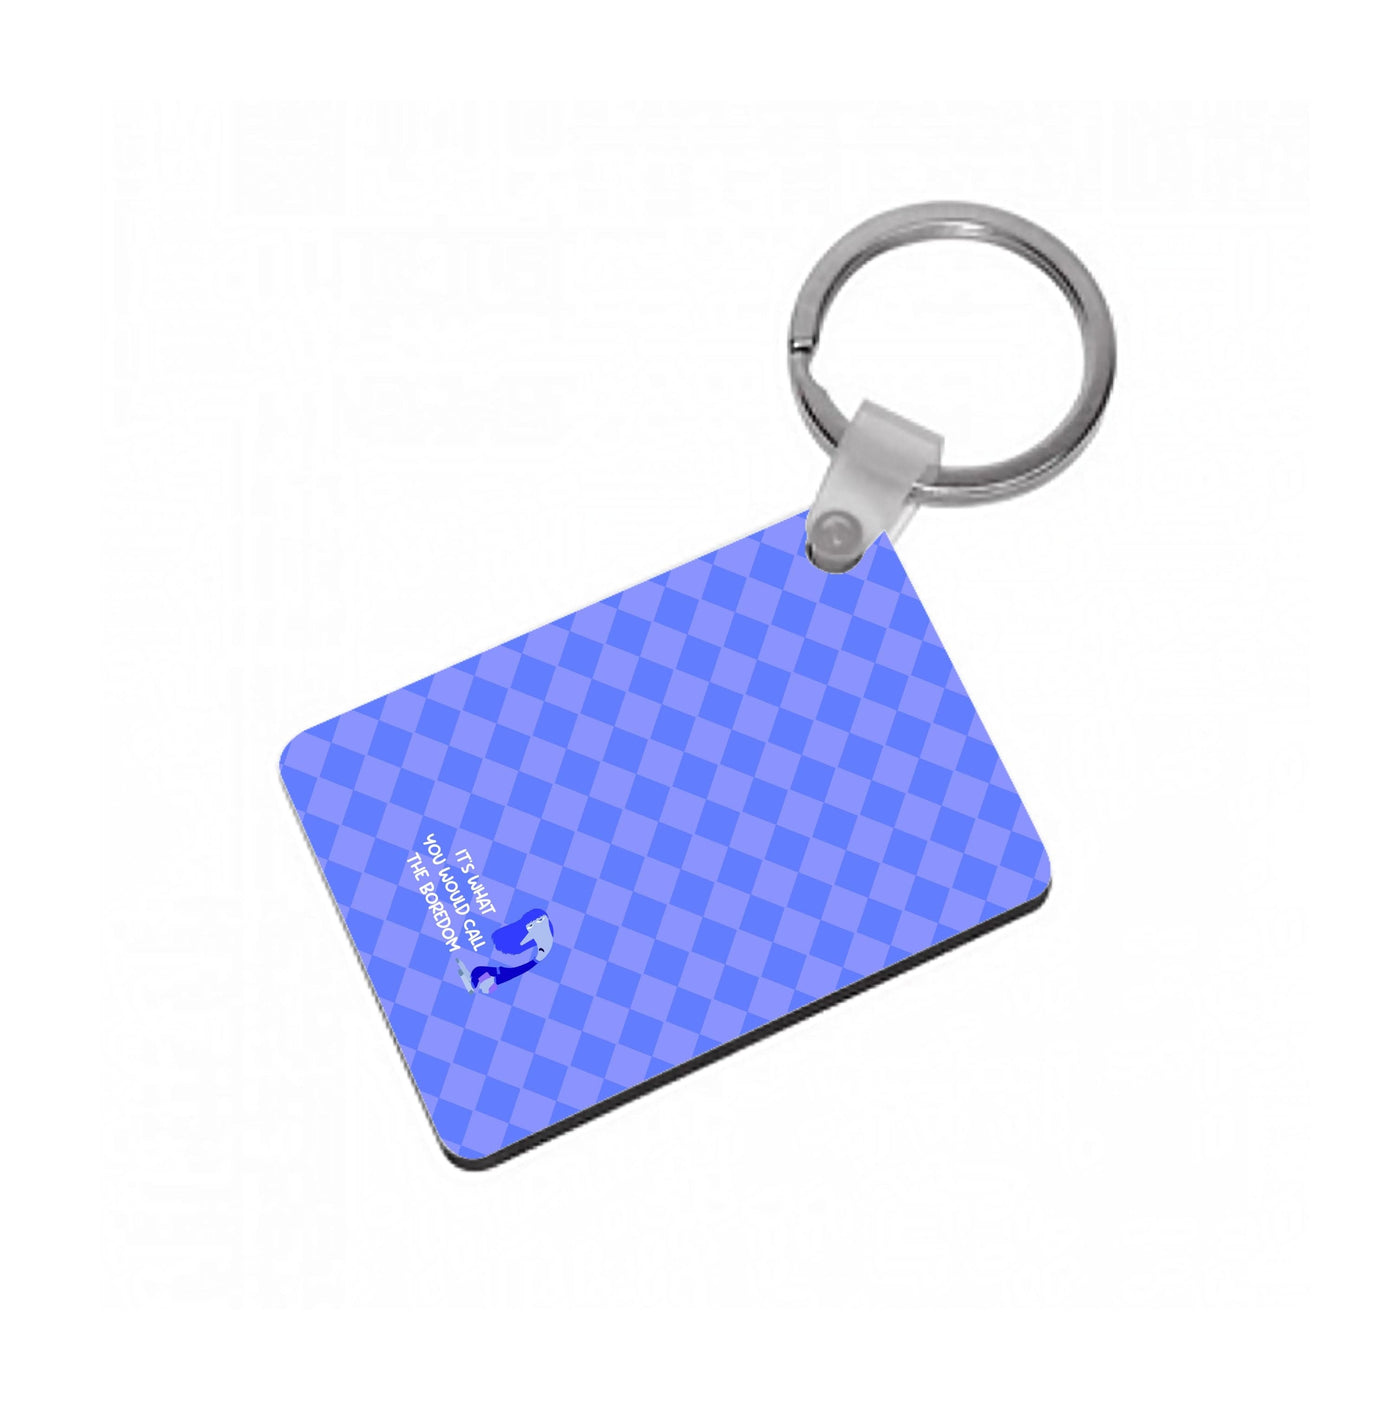 It's What You Would Call The Boredom - Inside Out Keyring